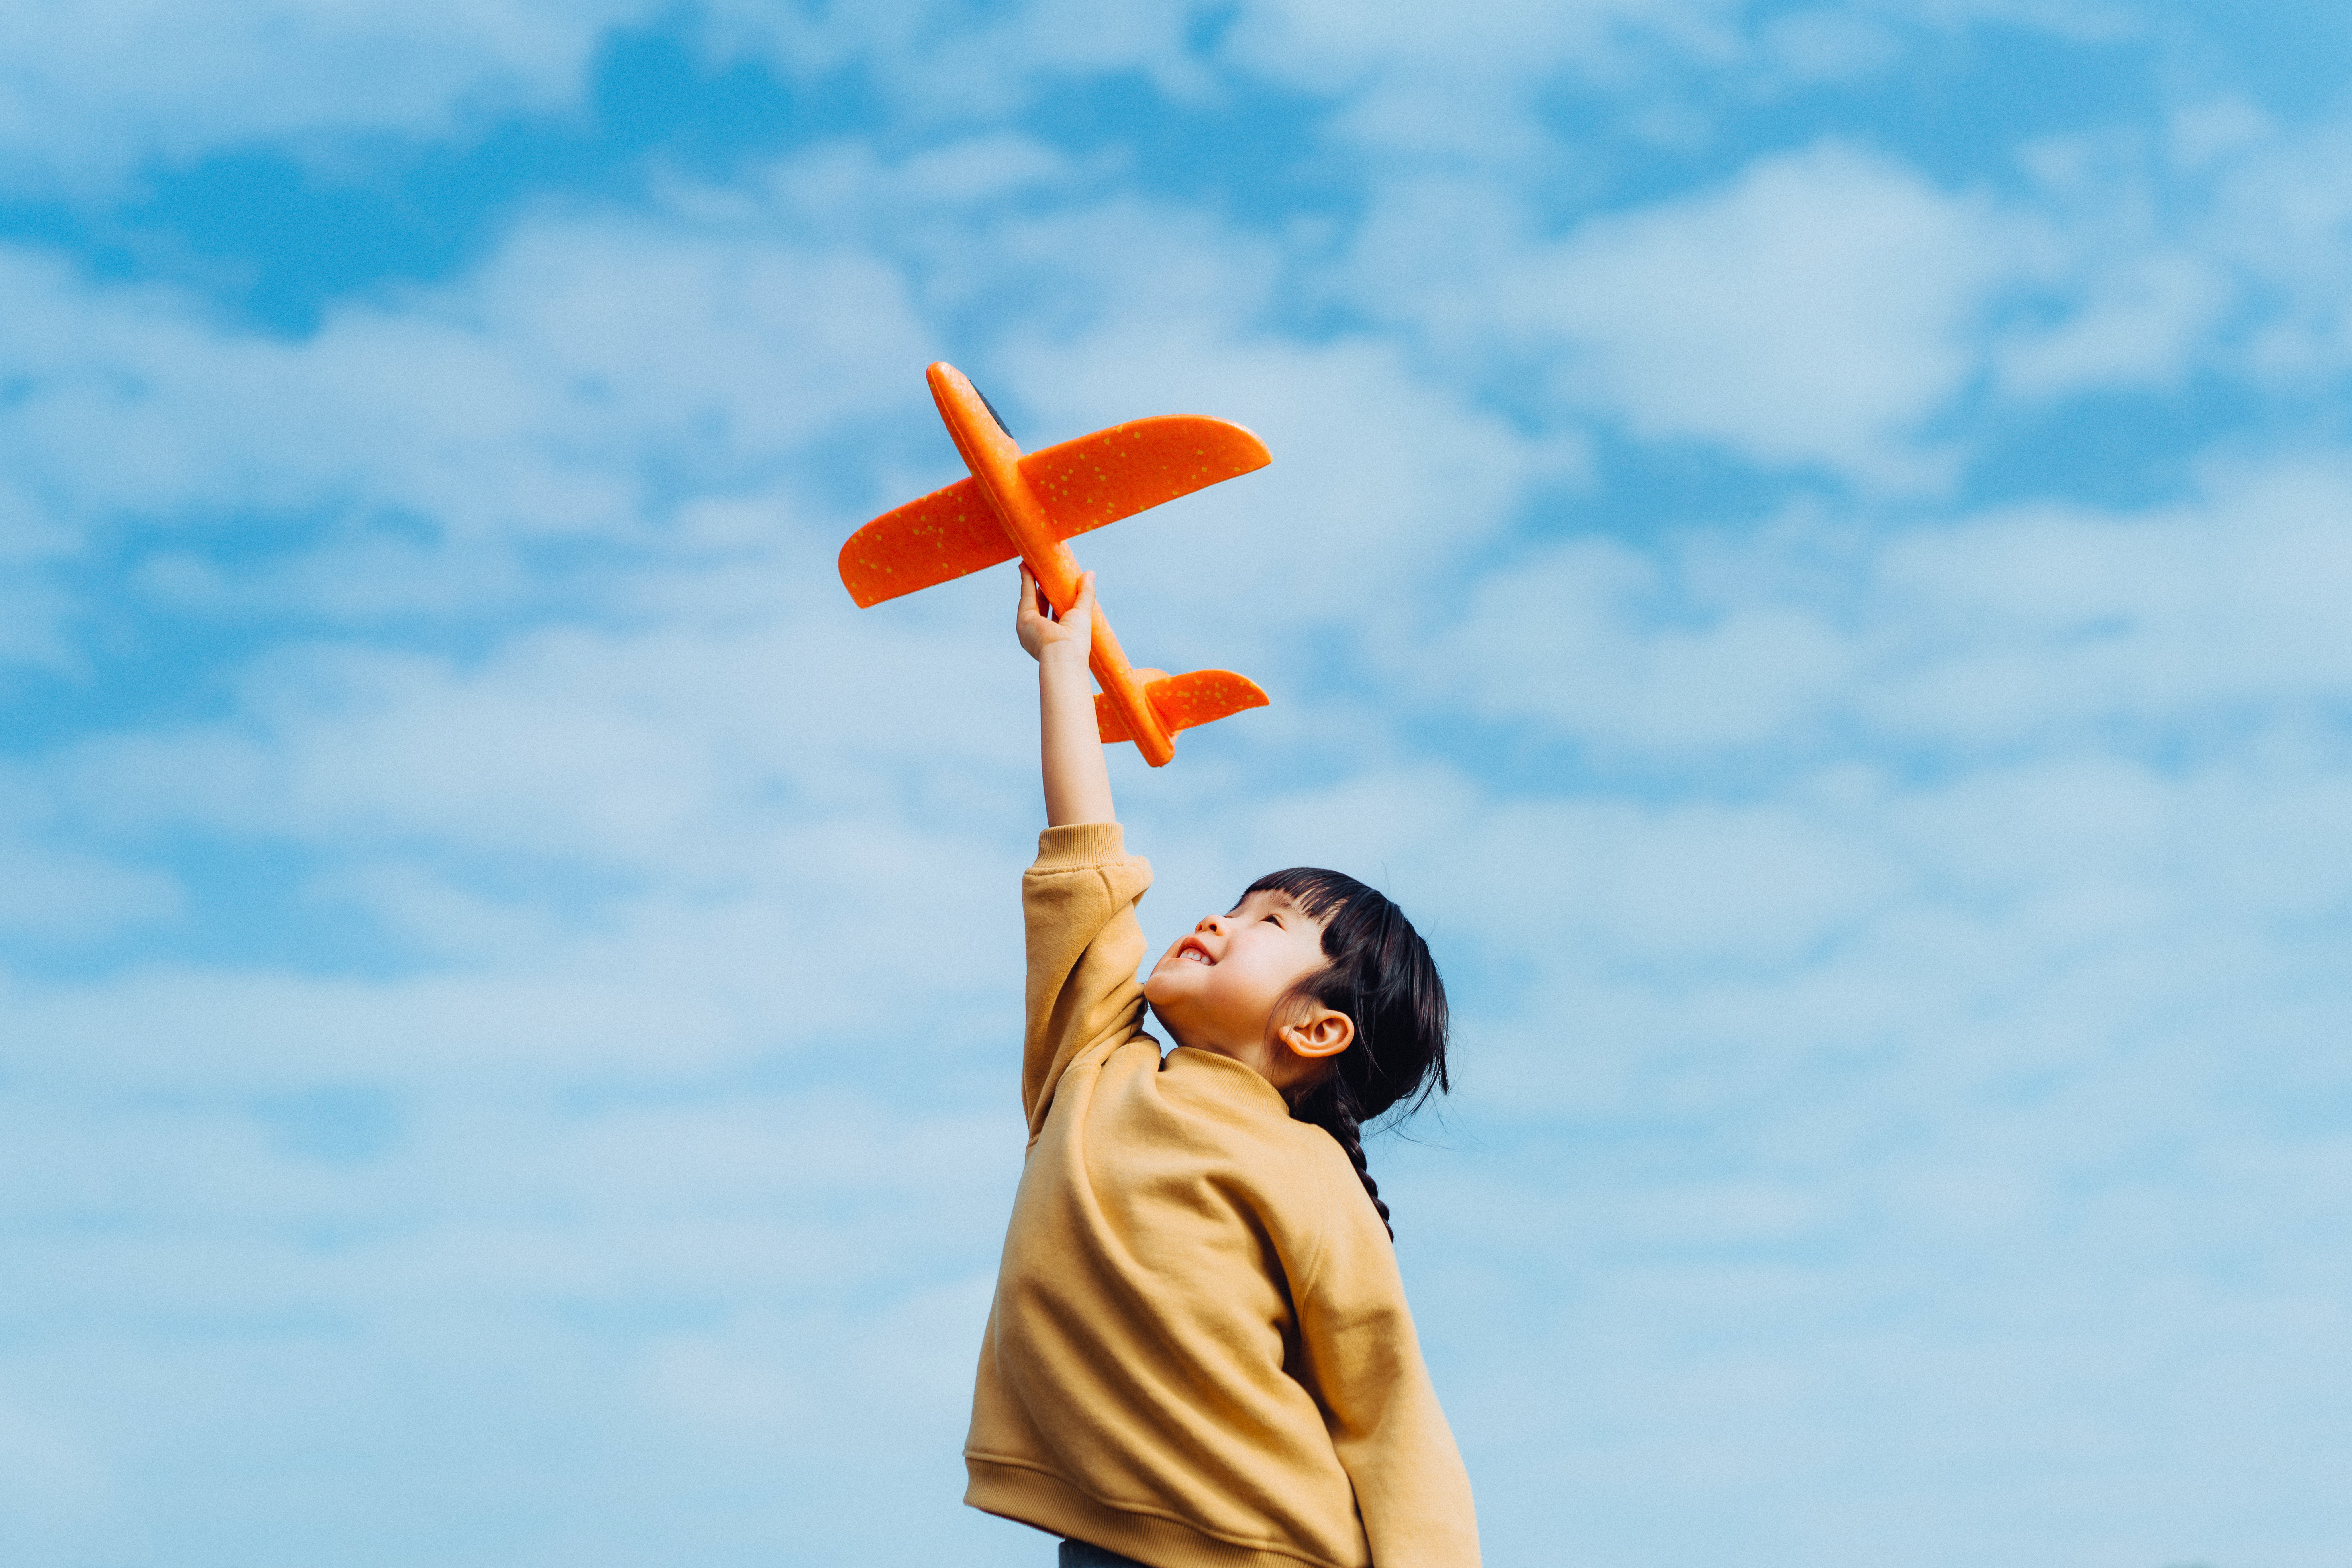 A child holds a red airplane toy above their head in front of a cloudy sky backdrop.